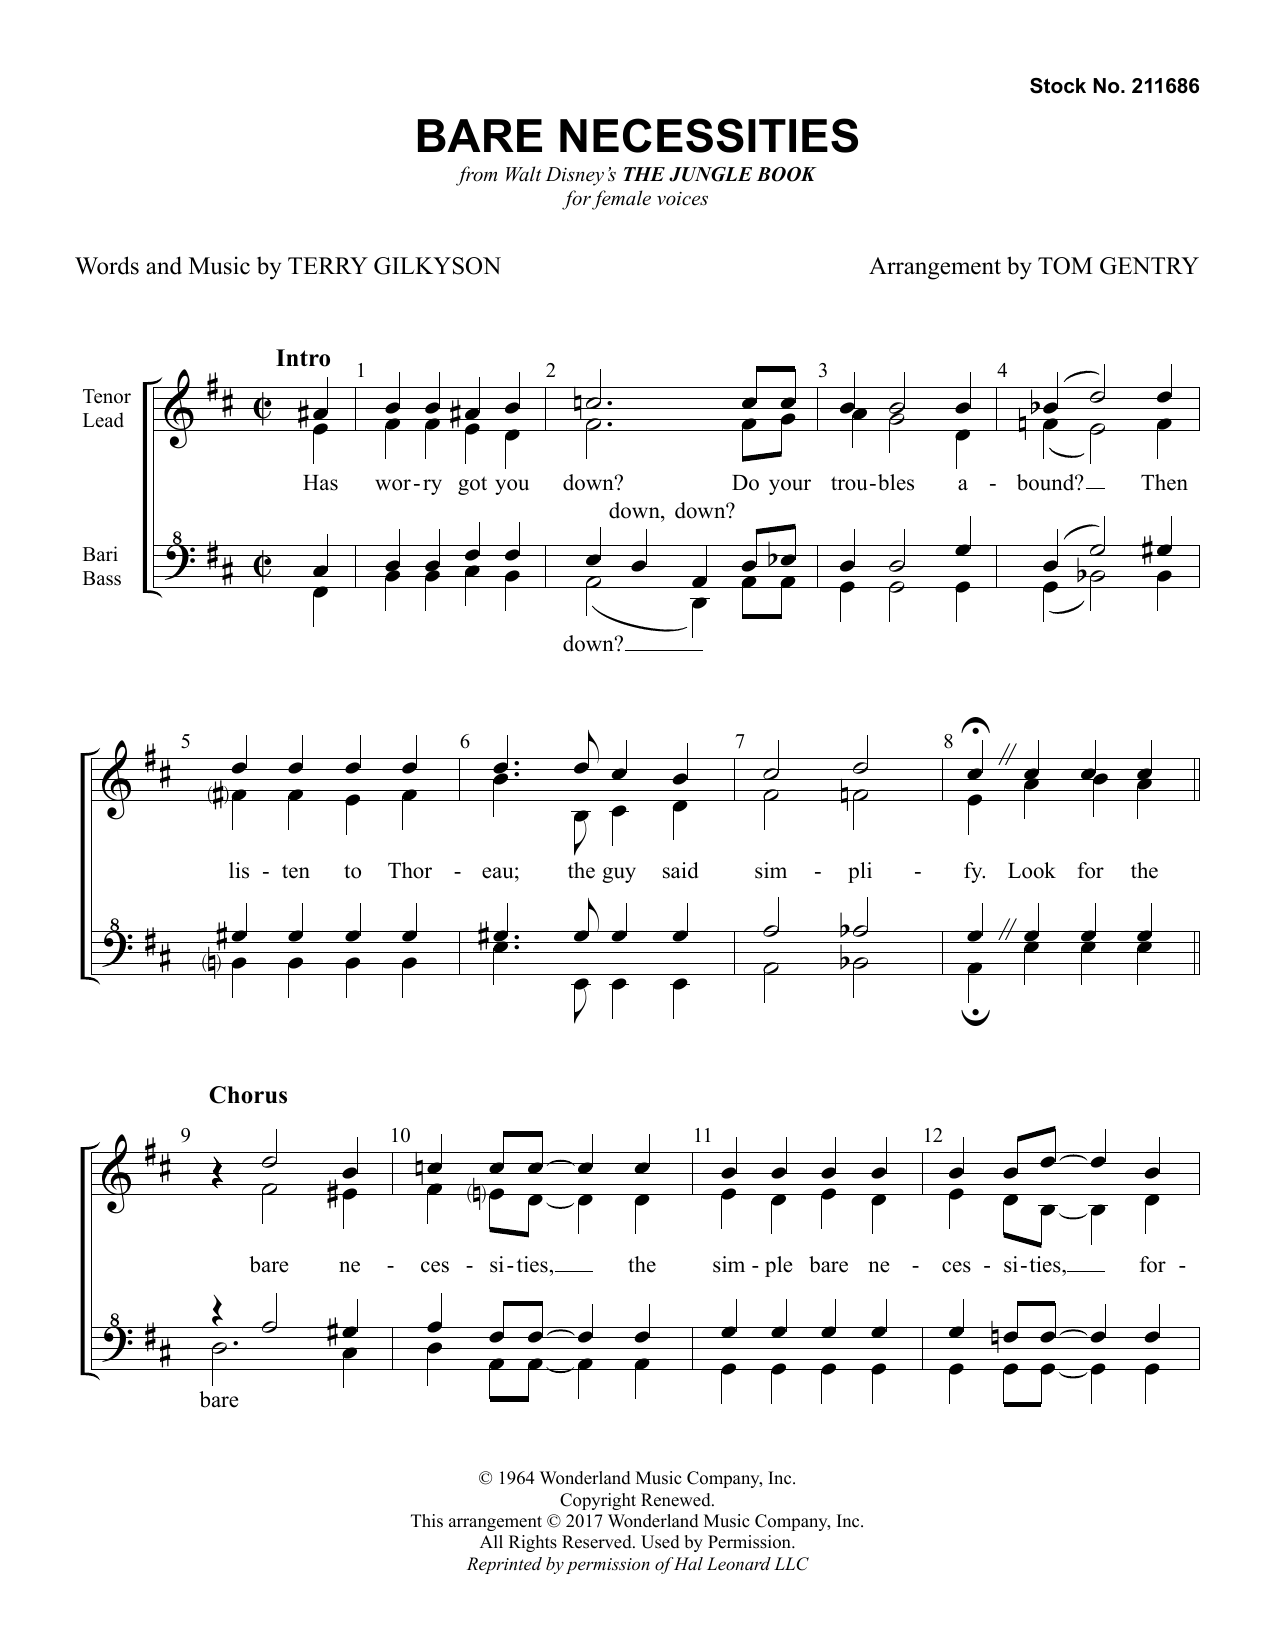 Download Terry Gilkyson Bare Necessities (from The Jungle Book) Sheet Music